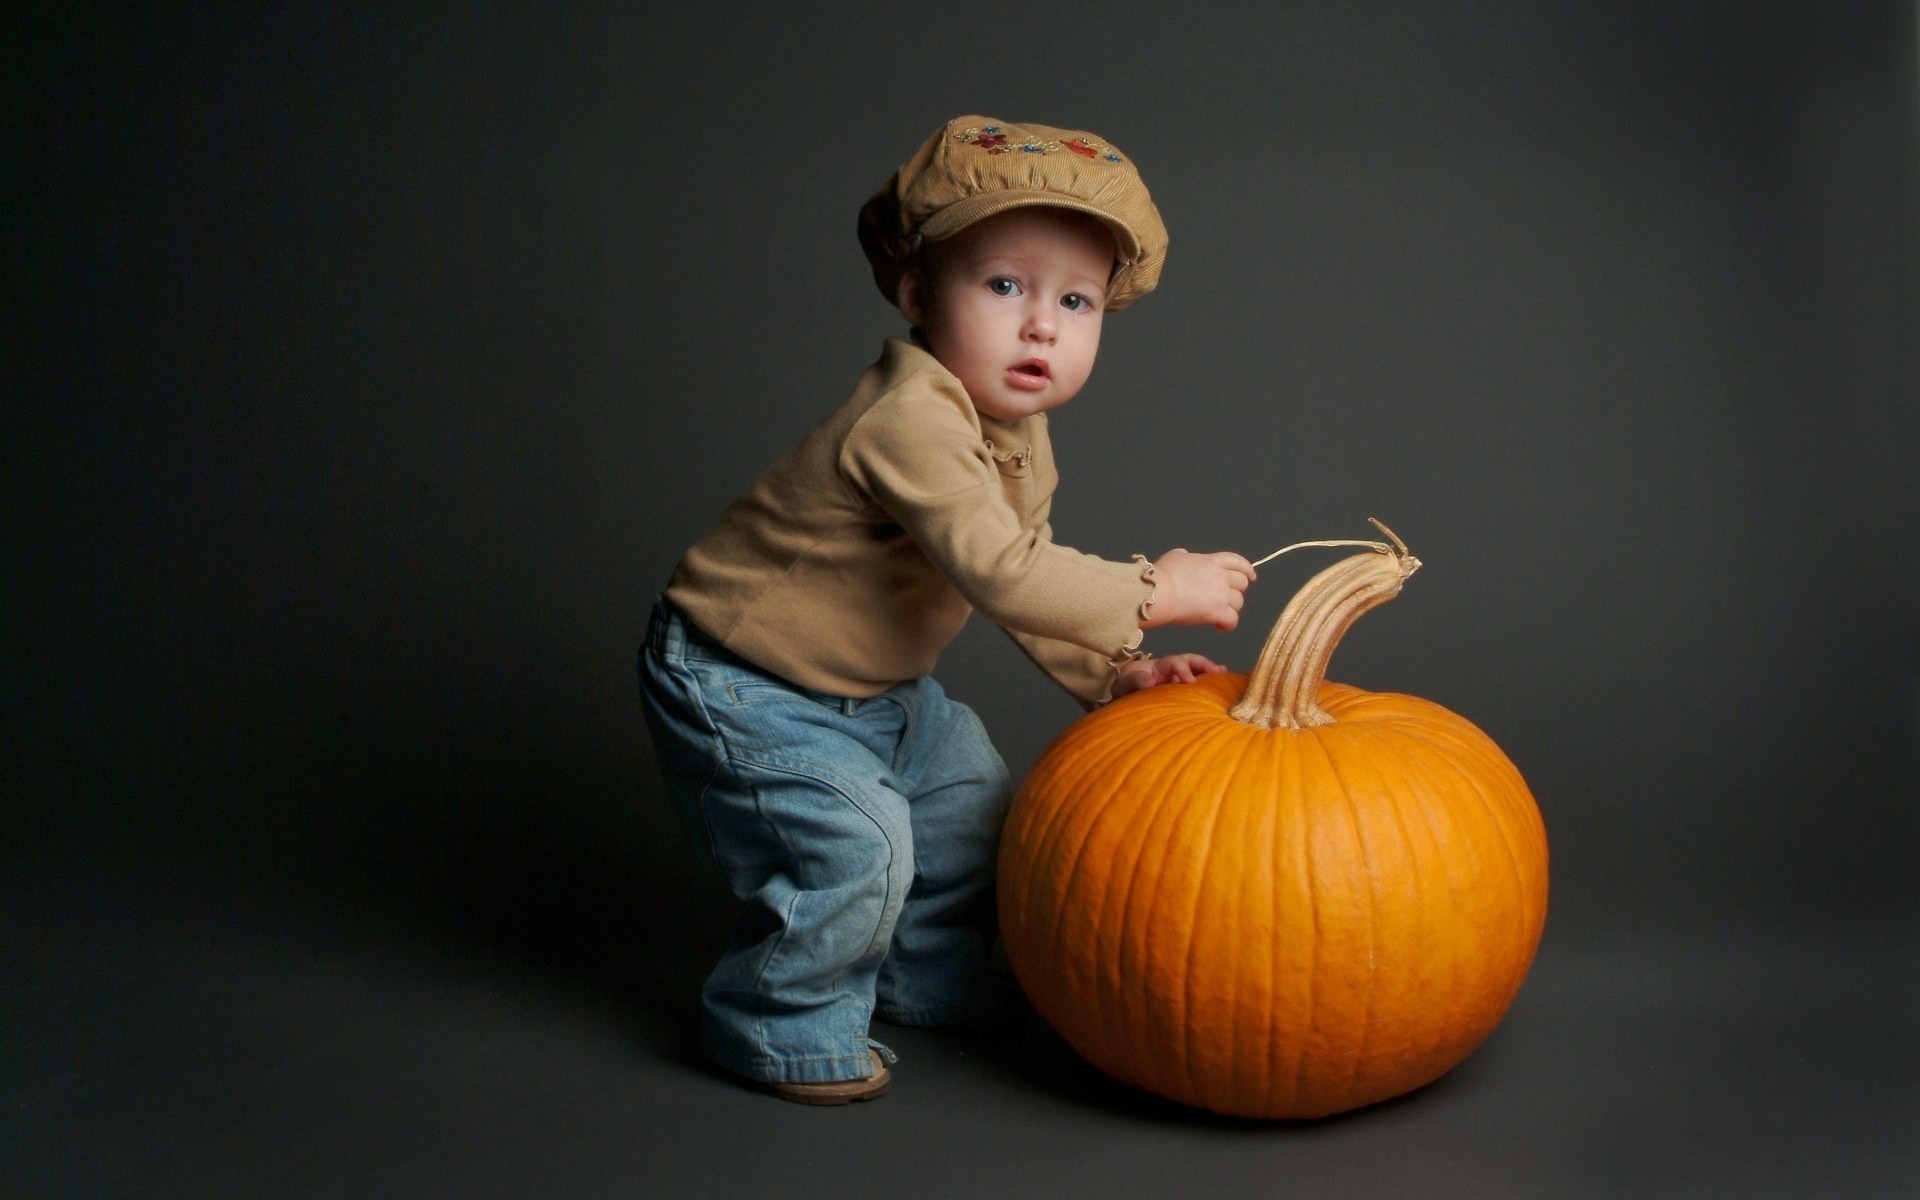 The Boy with Pumpkin for 1920 x 1200 widescreen resolution